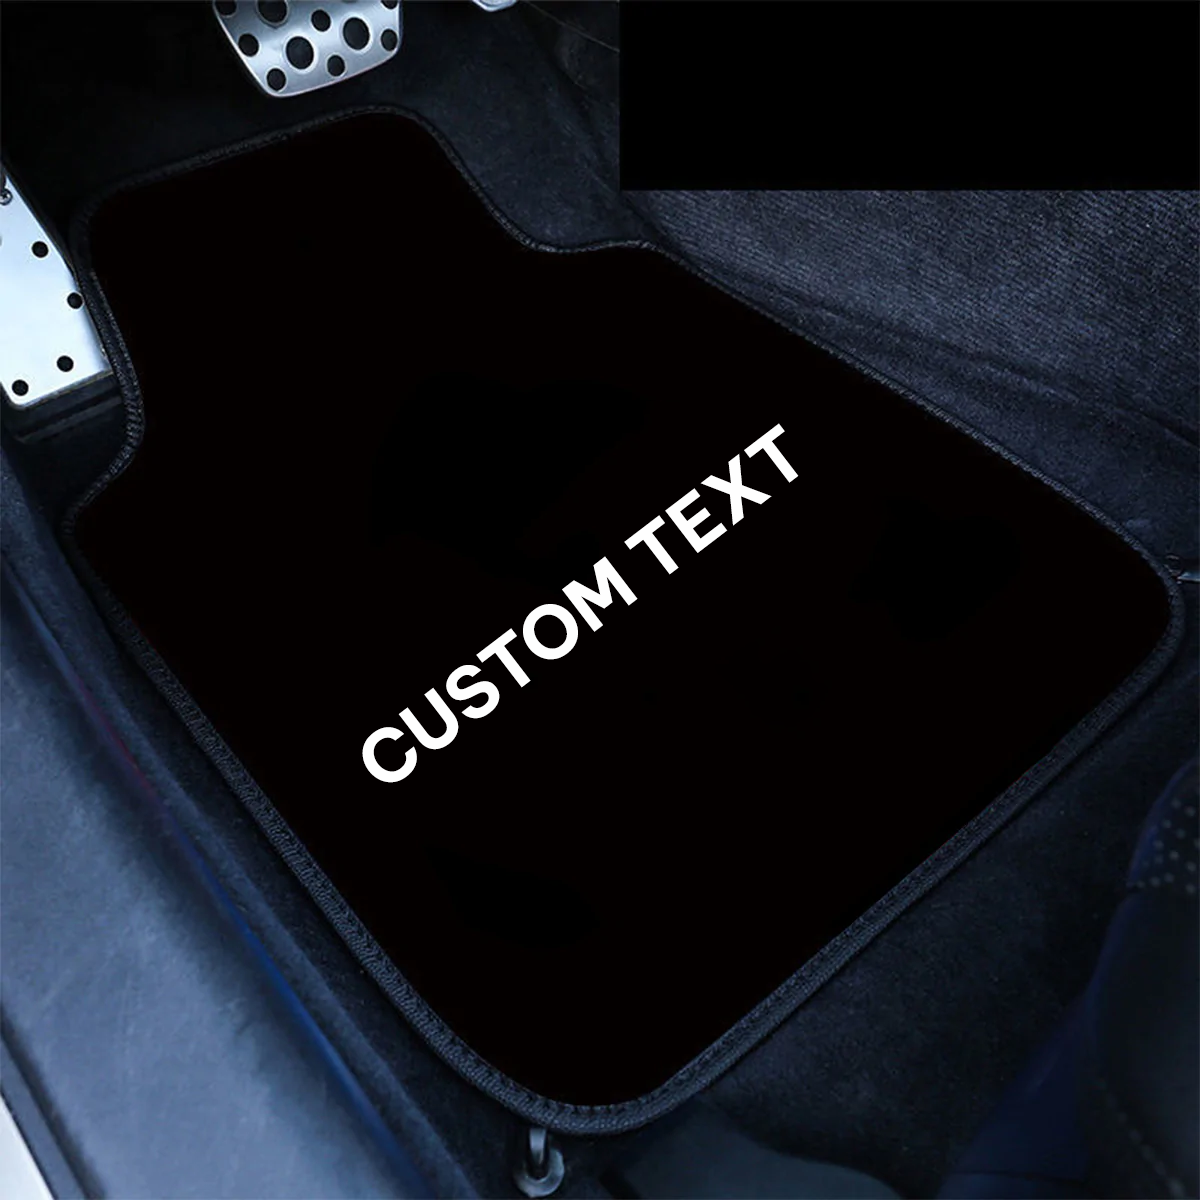 Custom Text For Carpet Floor Mats Set of 4pcs, Compatible with All Cars, Fit Car Floor Mats, All Weather Protection, Universal Type MA13984